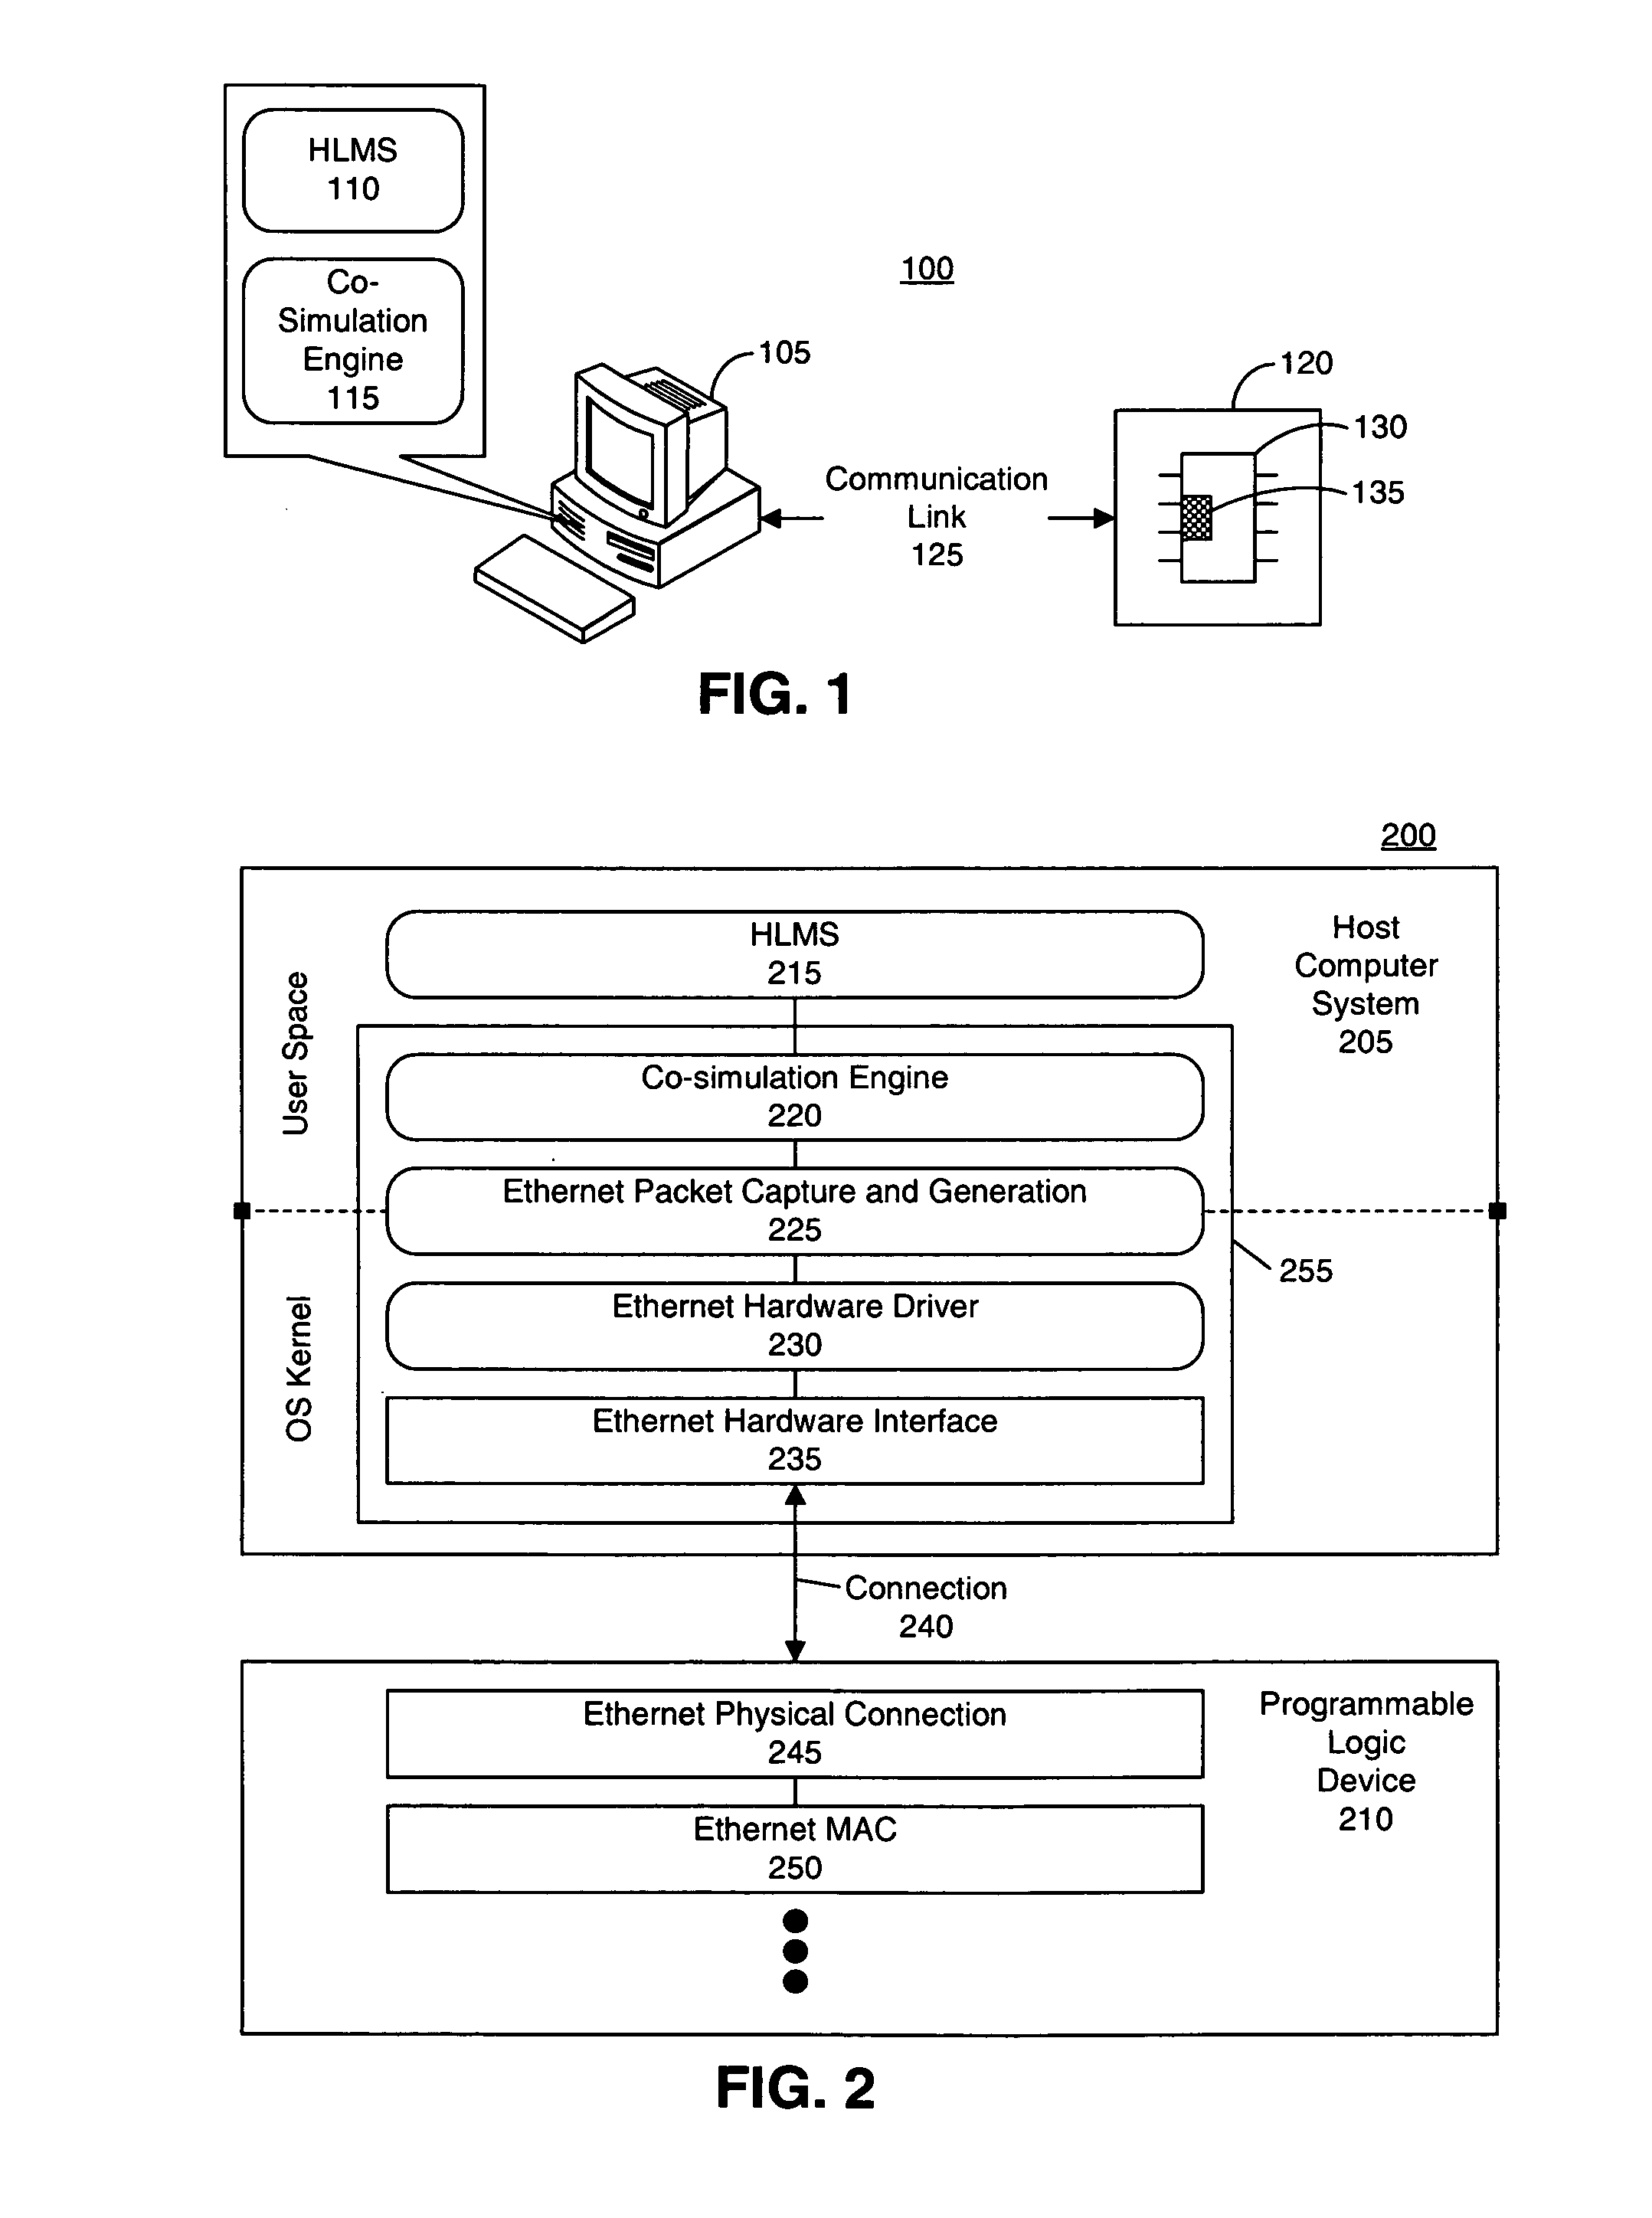 Point-to-point ethernet hardware co-simulation interface